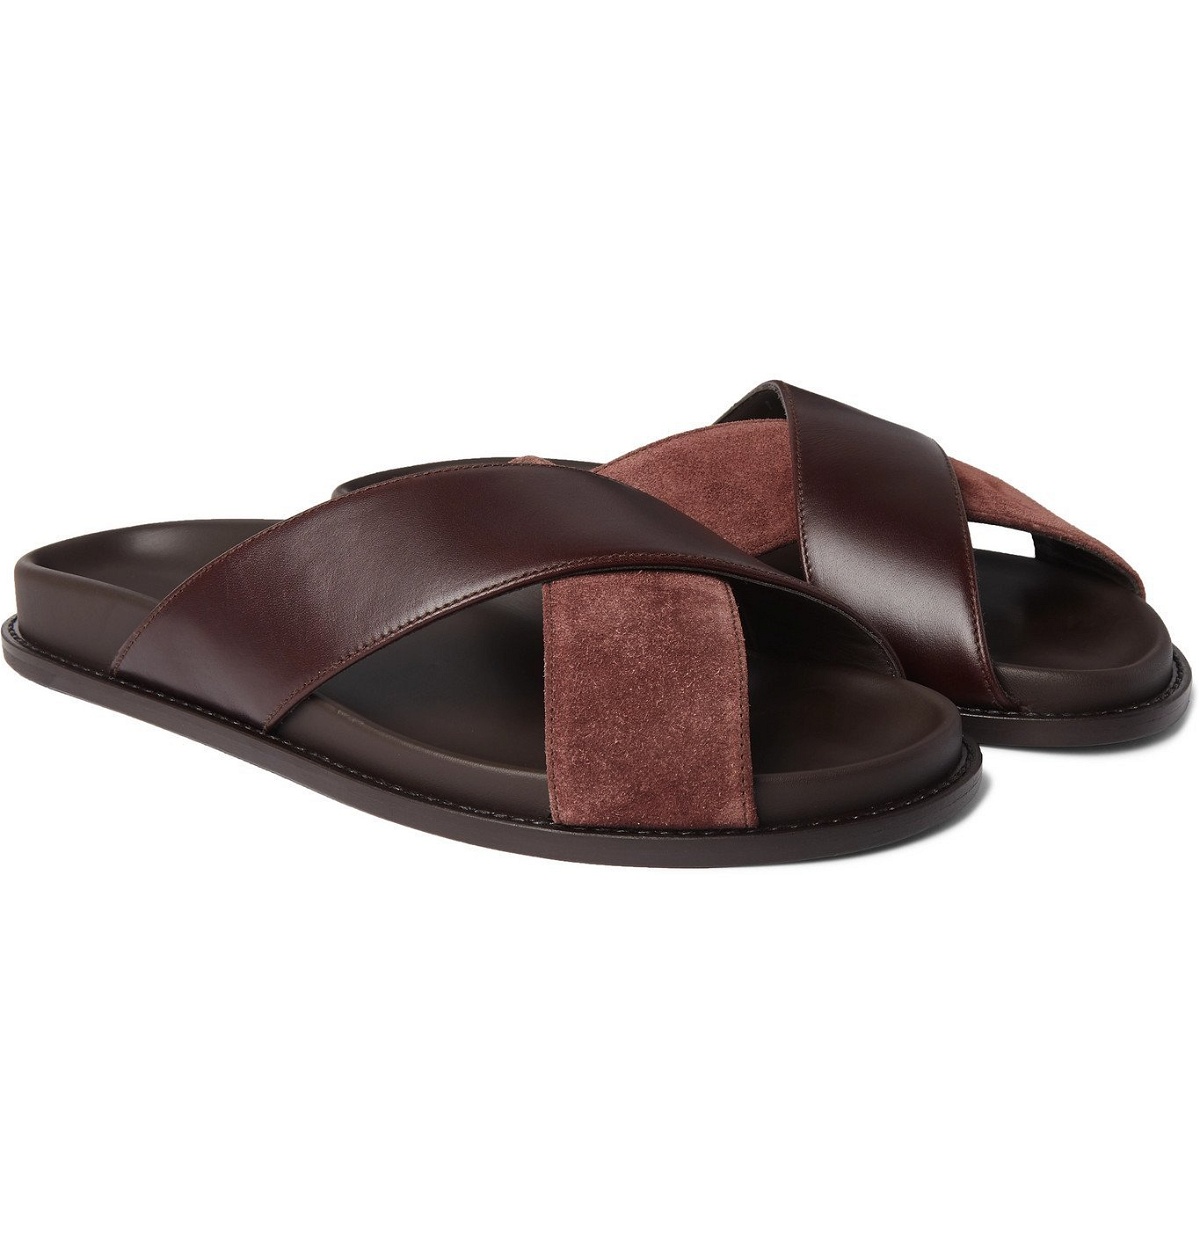 Mr P. - Leather and Suede Sandals - Brown Mr P.